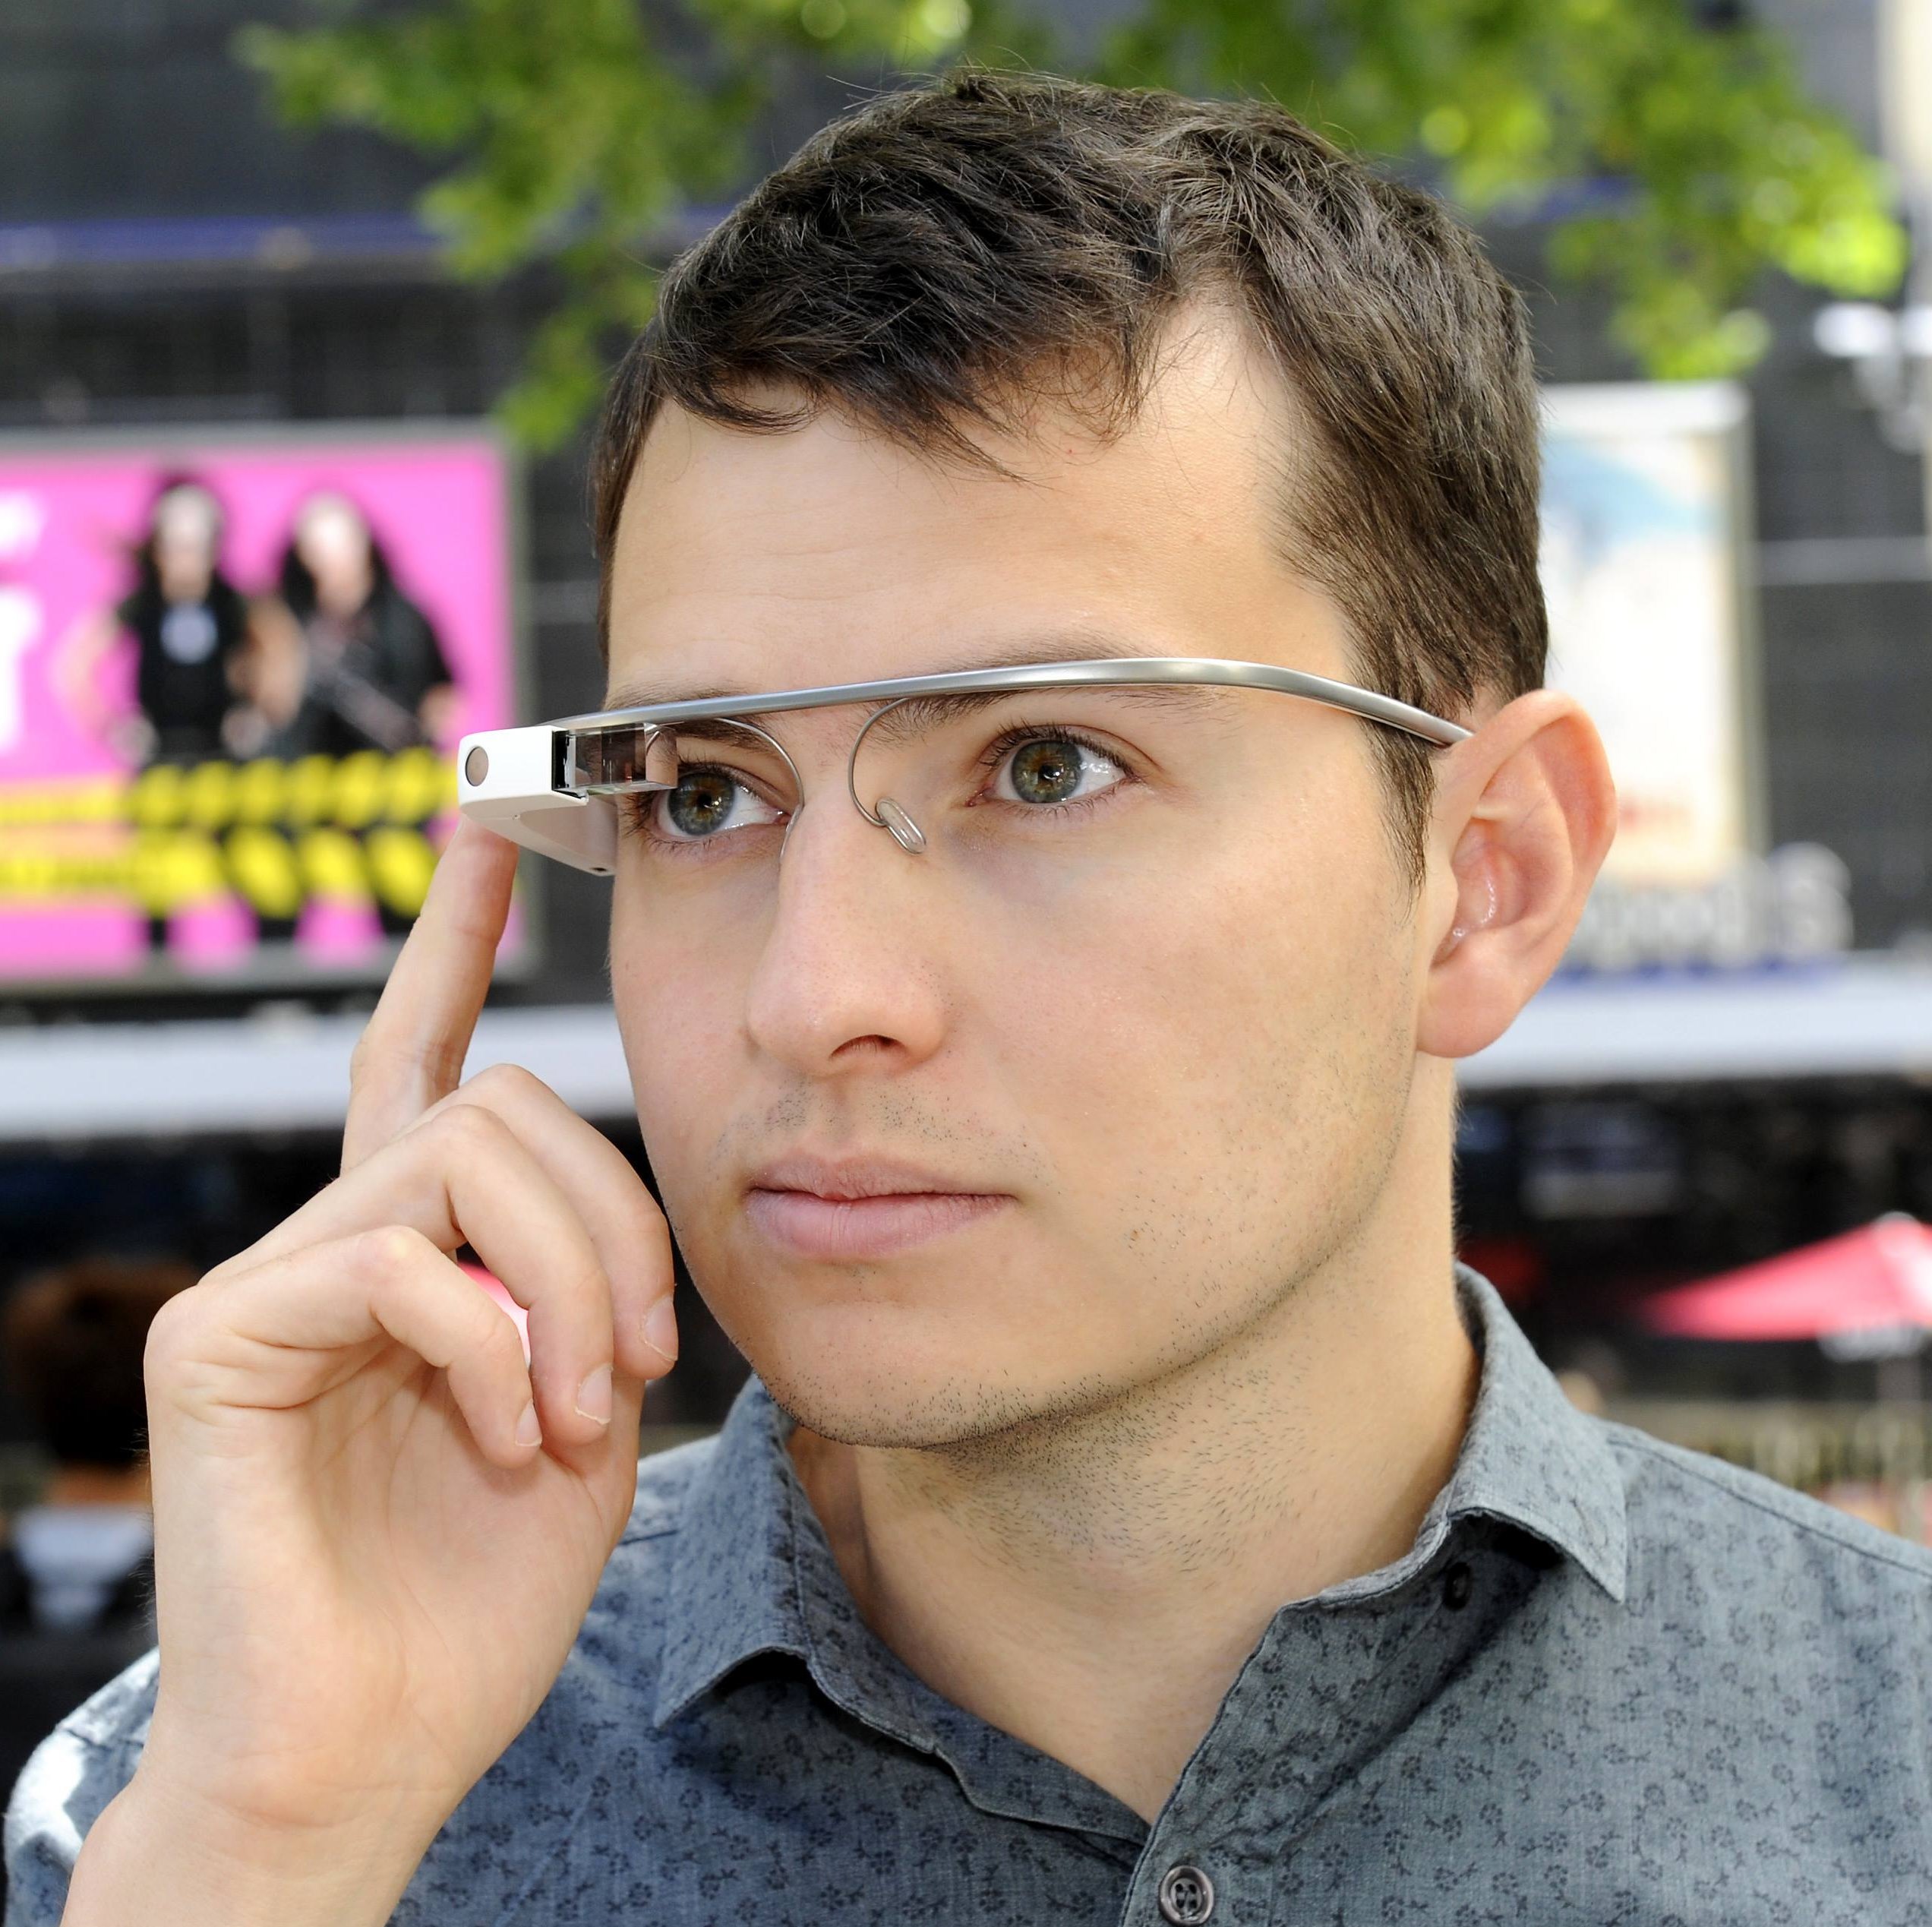 Google Glass Now on Sale in UK